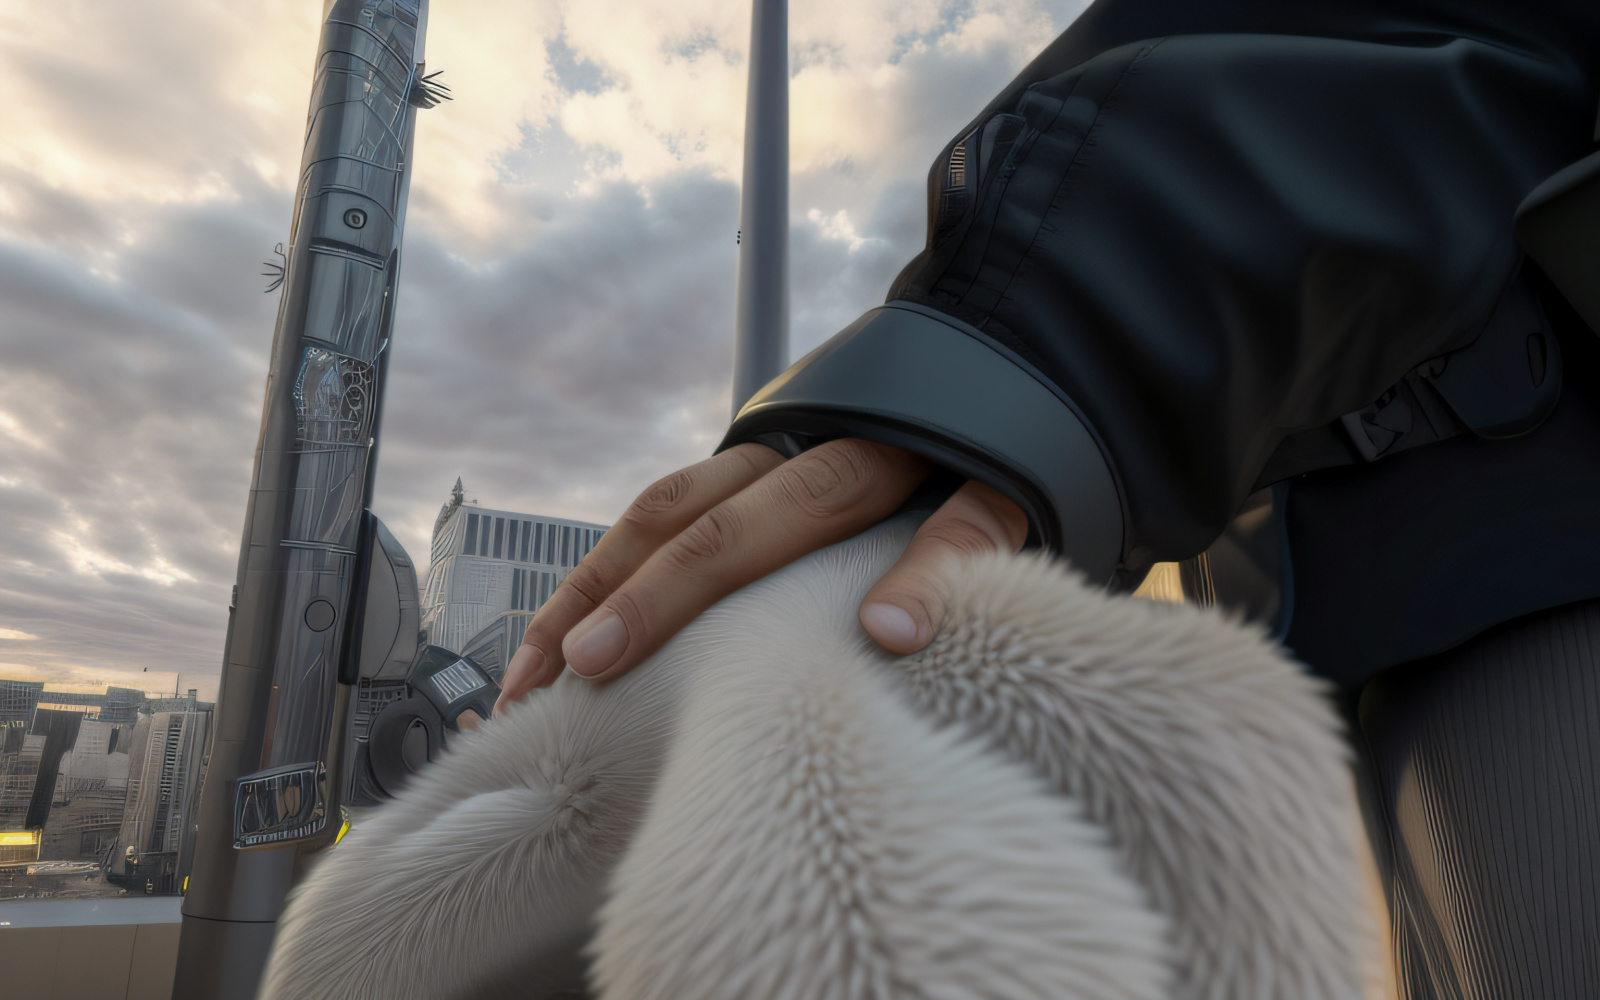 The AI-generated motif shows a part of a person. The person's hand is on the back of a white dog's head.